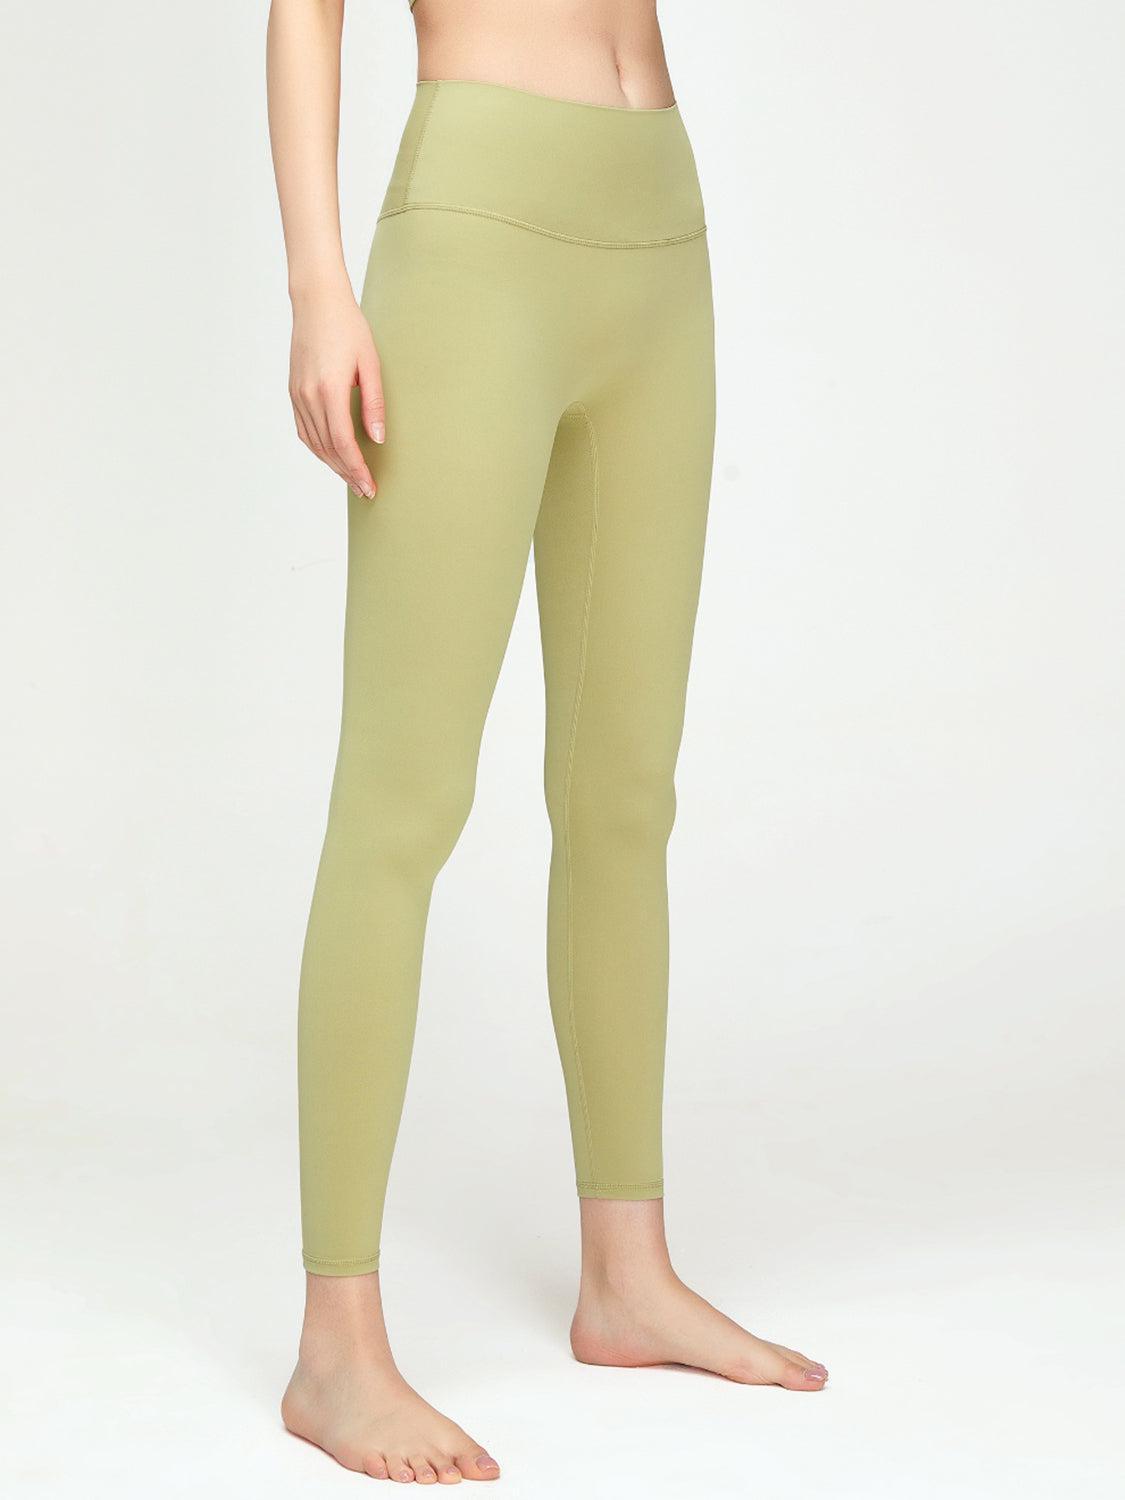 a woman in a green top and leggings